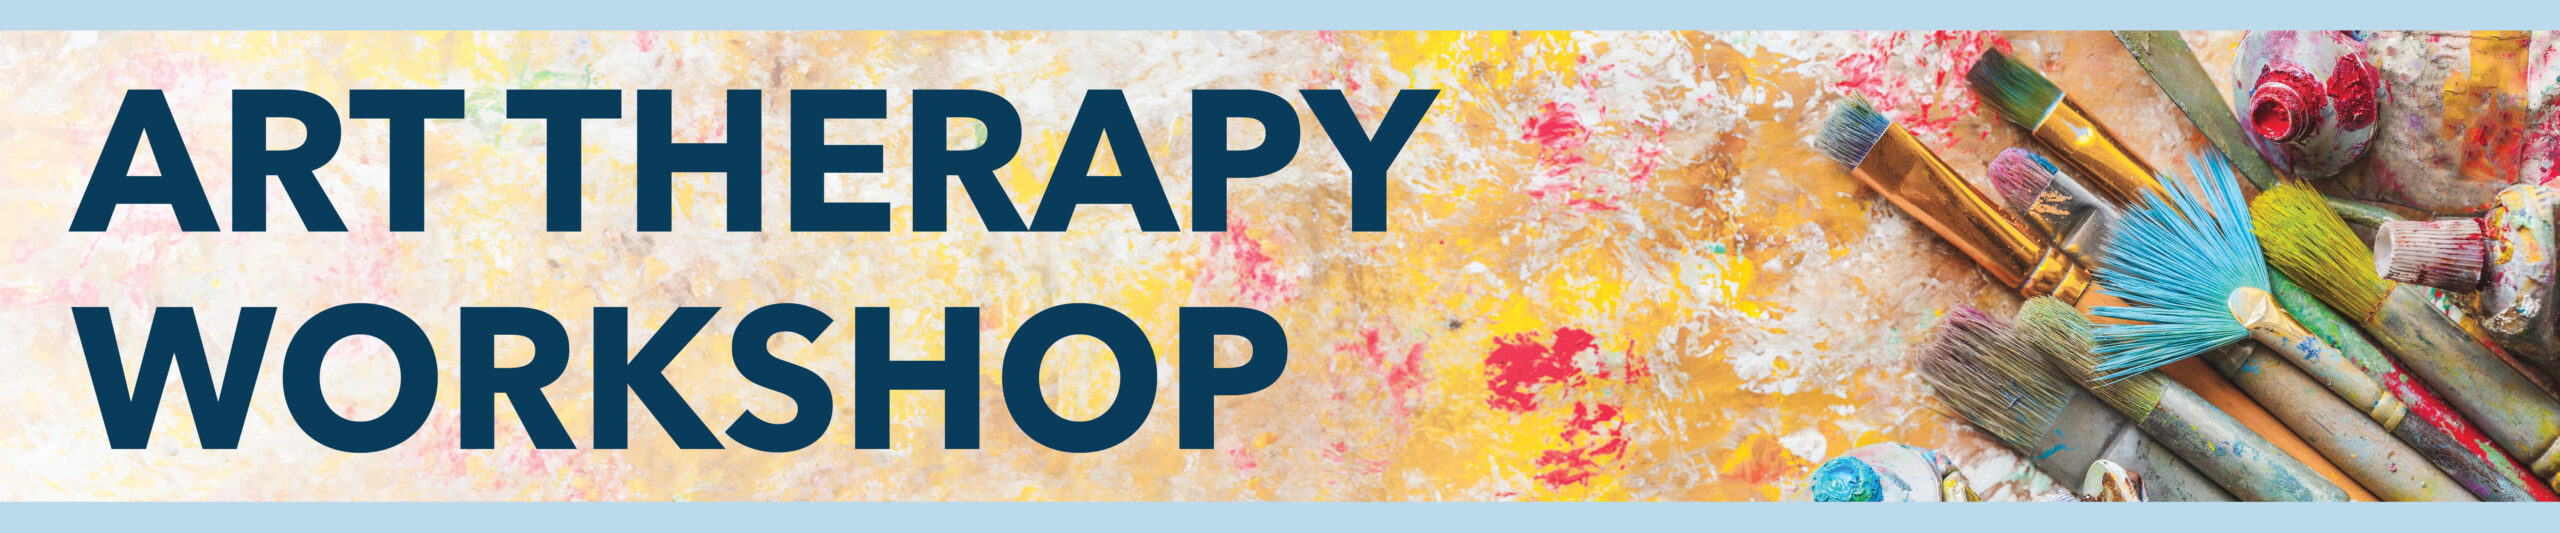 Art-Therapy-Workshop-Banner